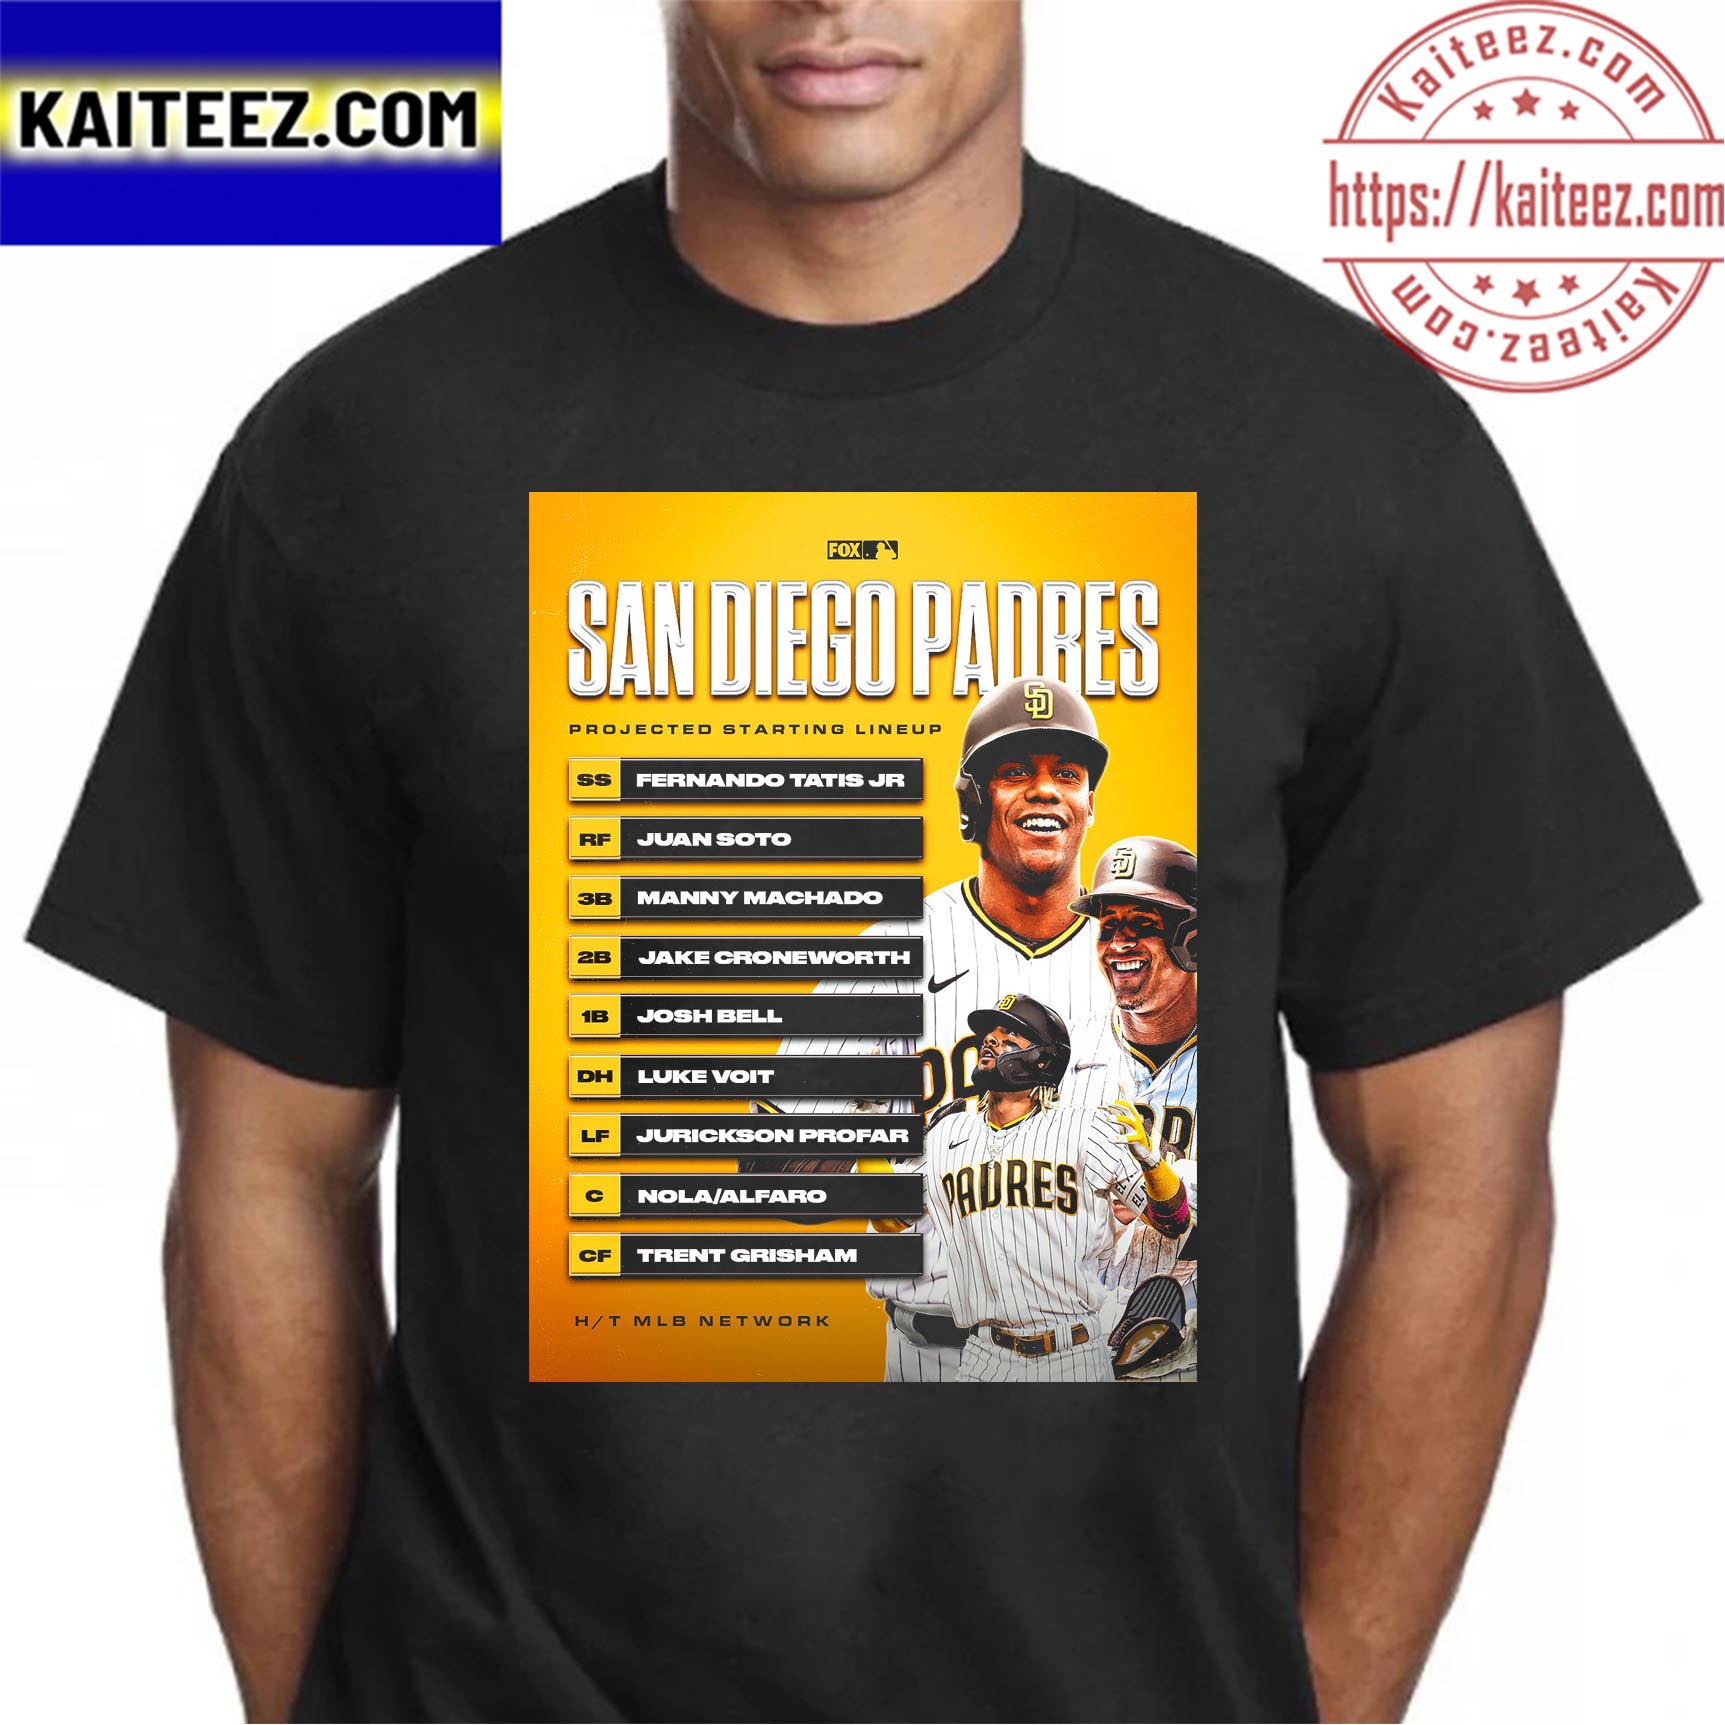 LHP Josh Hader From Milwaukee Brewers to San Diego Padres Unisex T